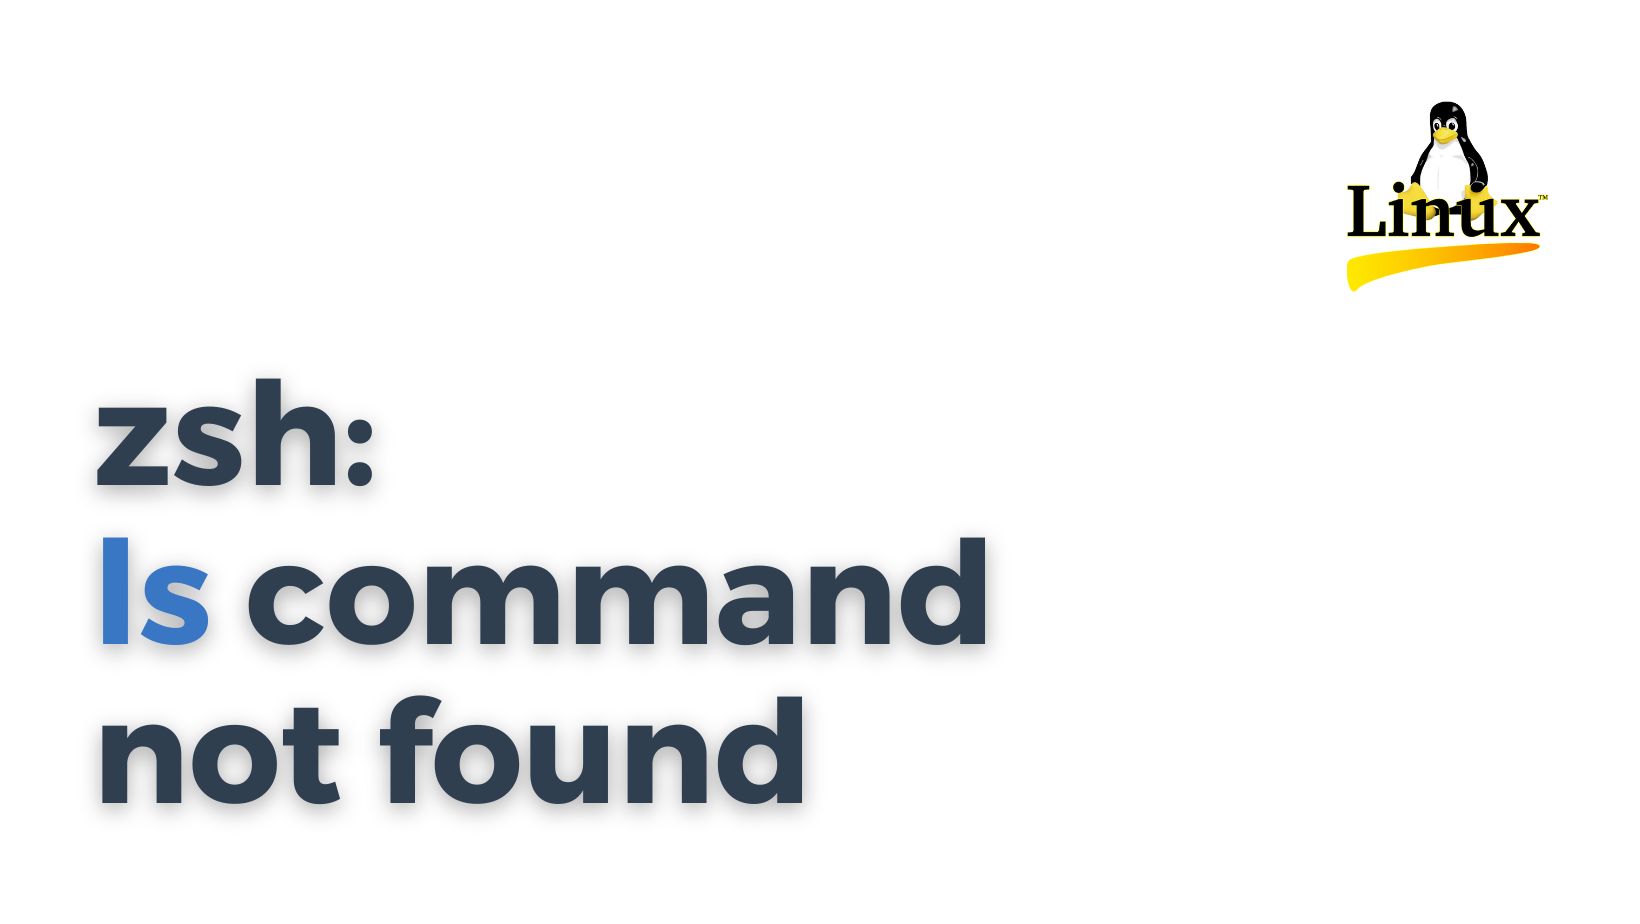 ZSH: command not found: ls